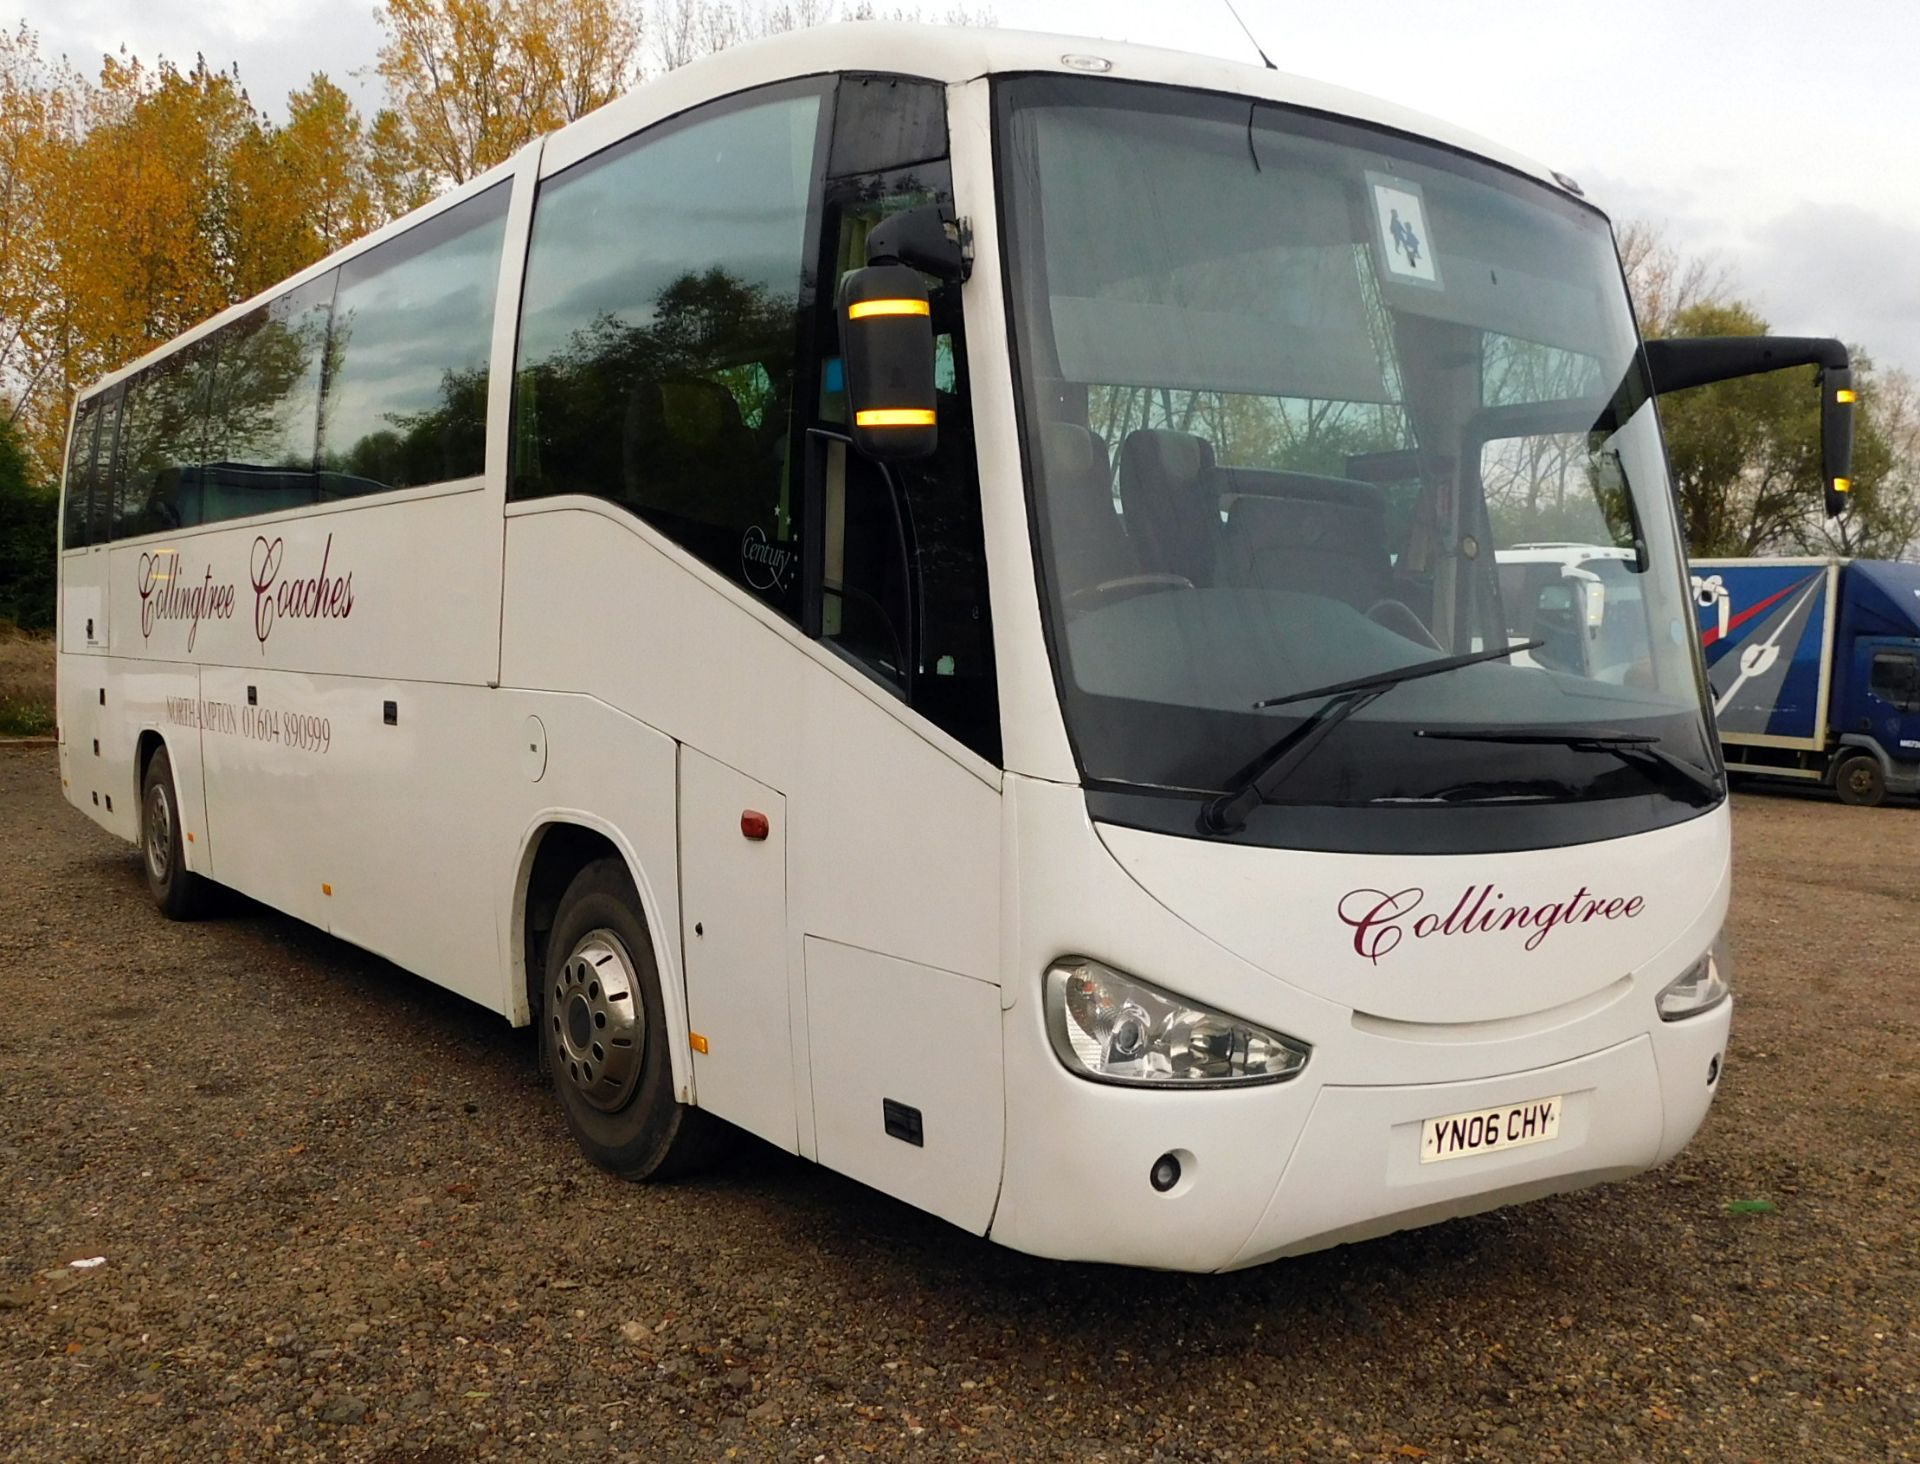 Scania Irizar K 340 EB4x2NI Euro4 53-Seat Coach, Registration Number YN06 CHY, First Registered 2nd - Image 2 of 27